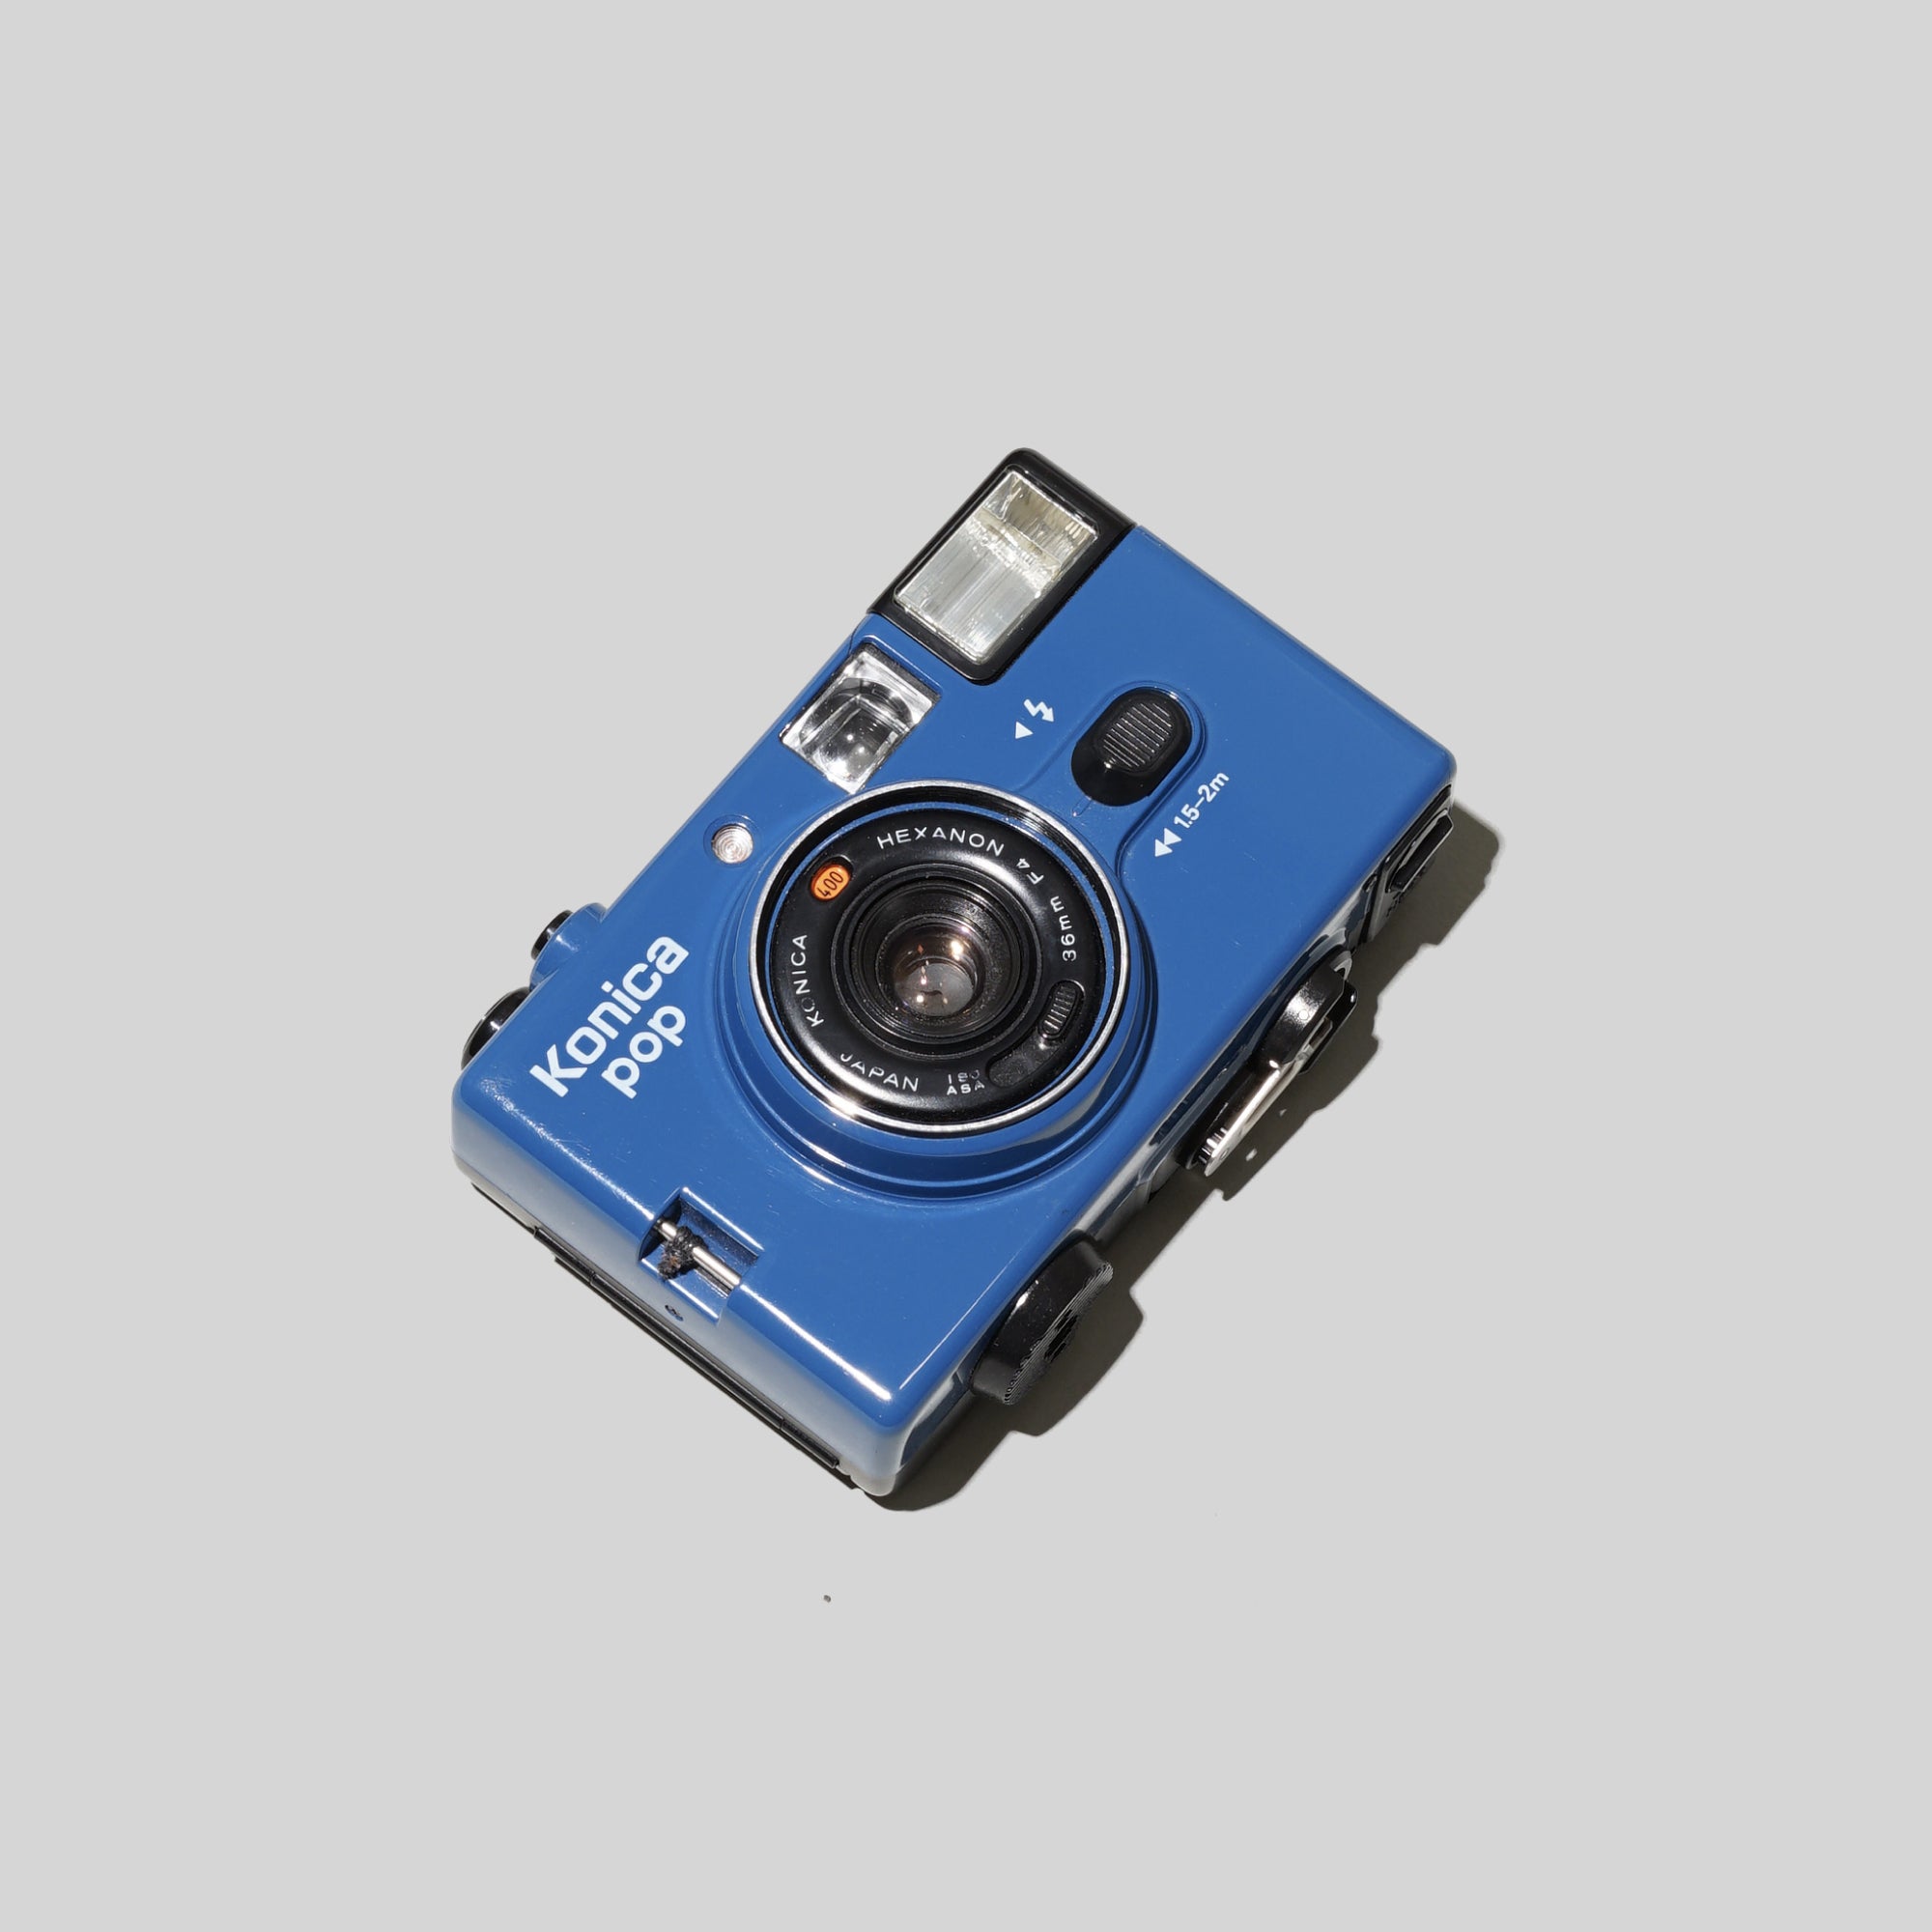 Buy Konica Pop Blue now at Analogue Amsterdam